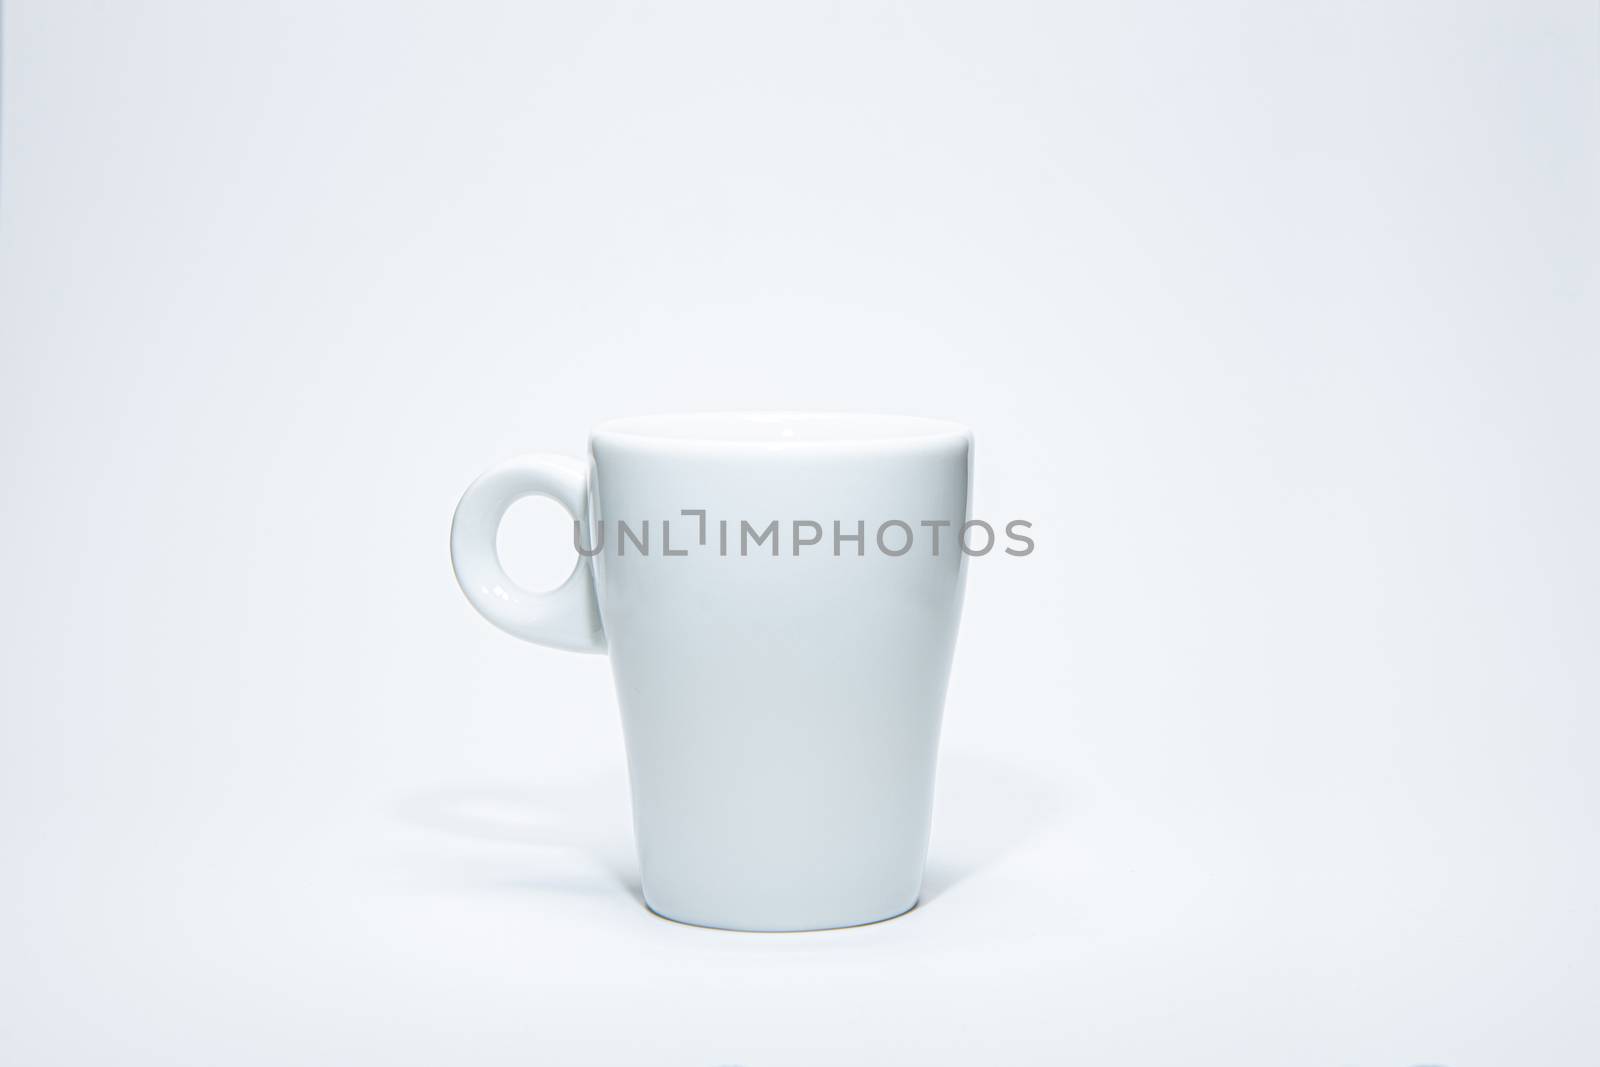 clean luxury coffee cup on white background